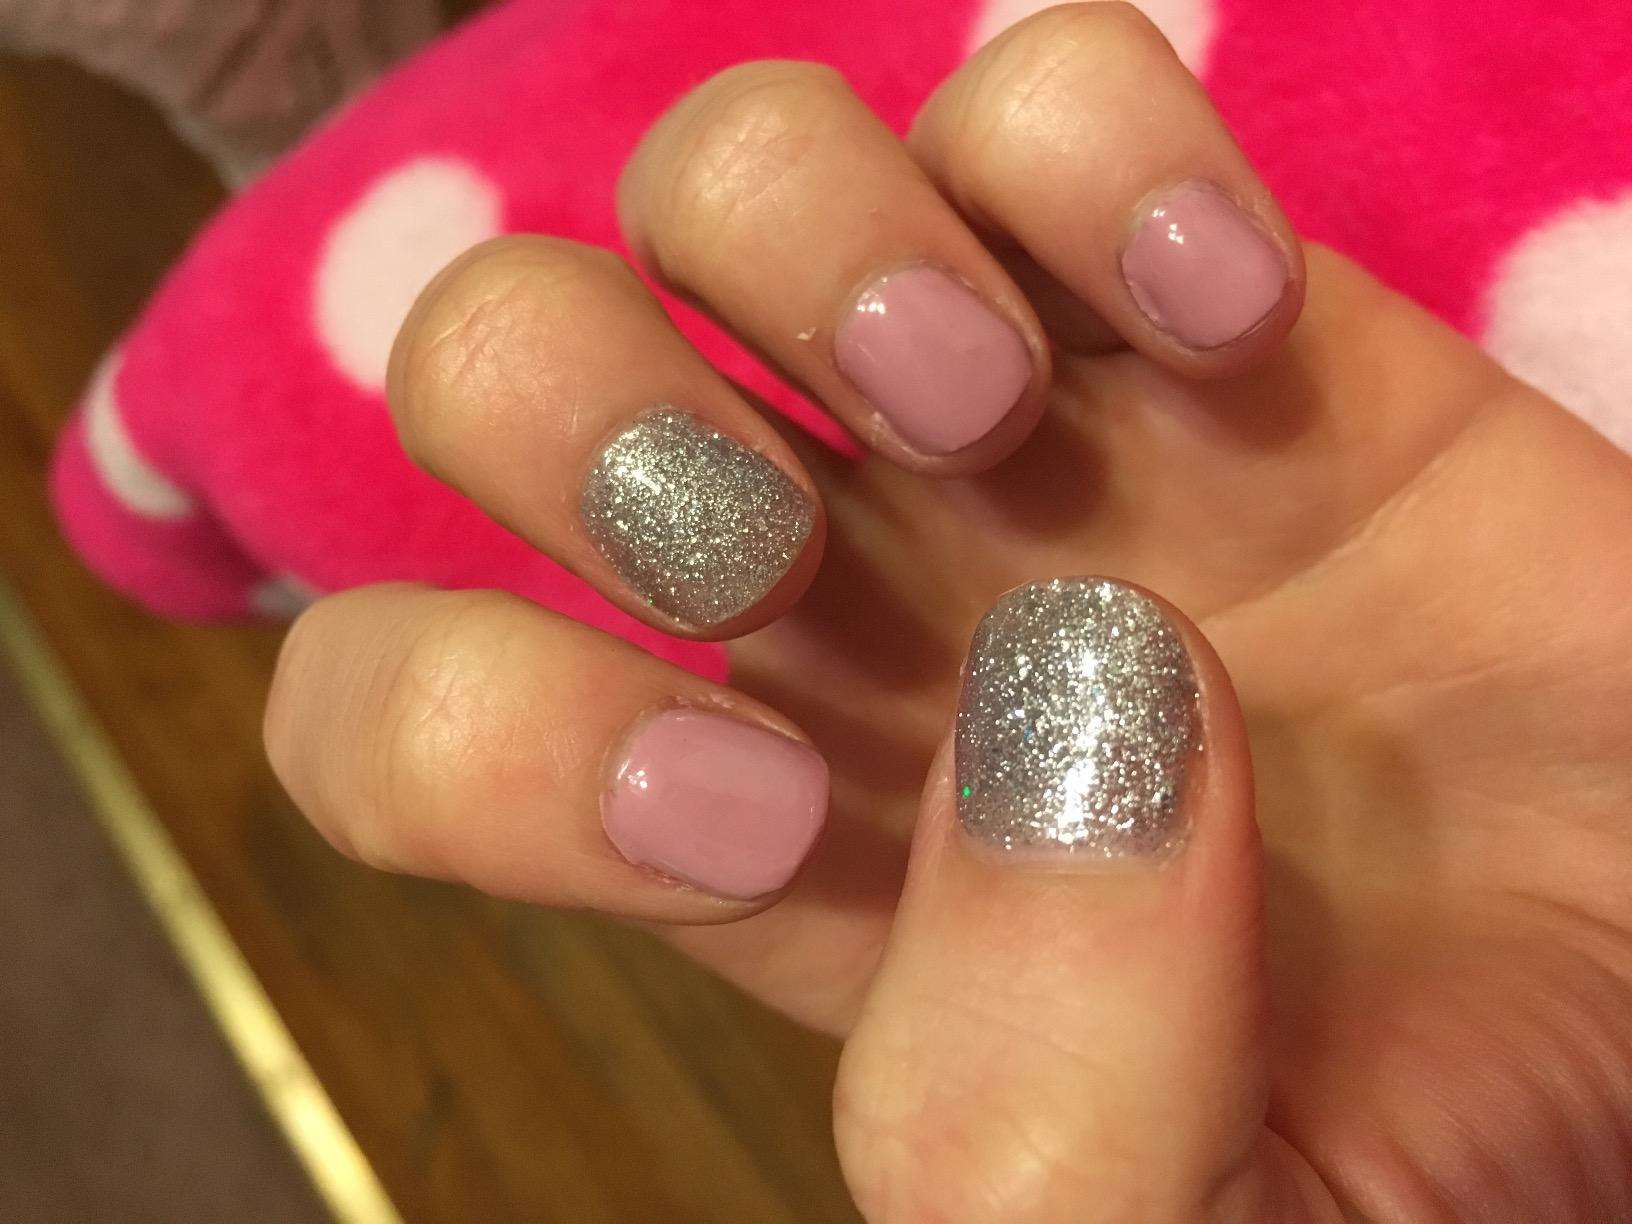 12 New Year's Nail Ideas That Are Truly Stunning